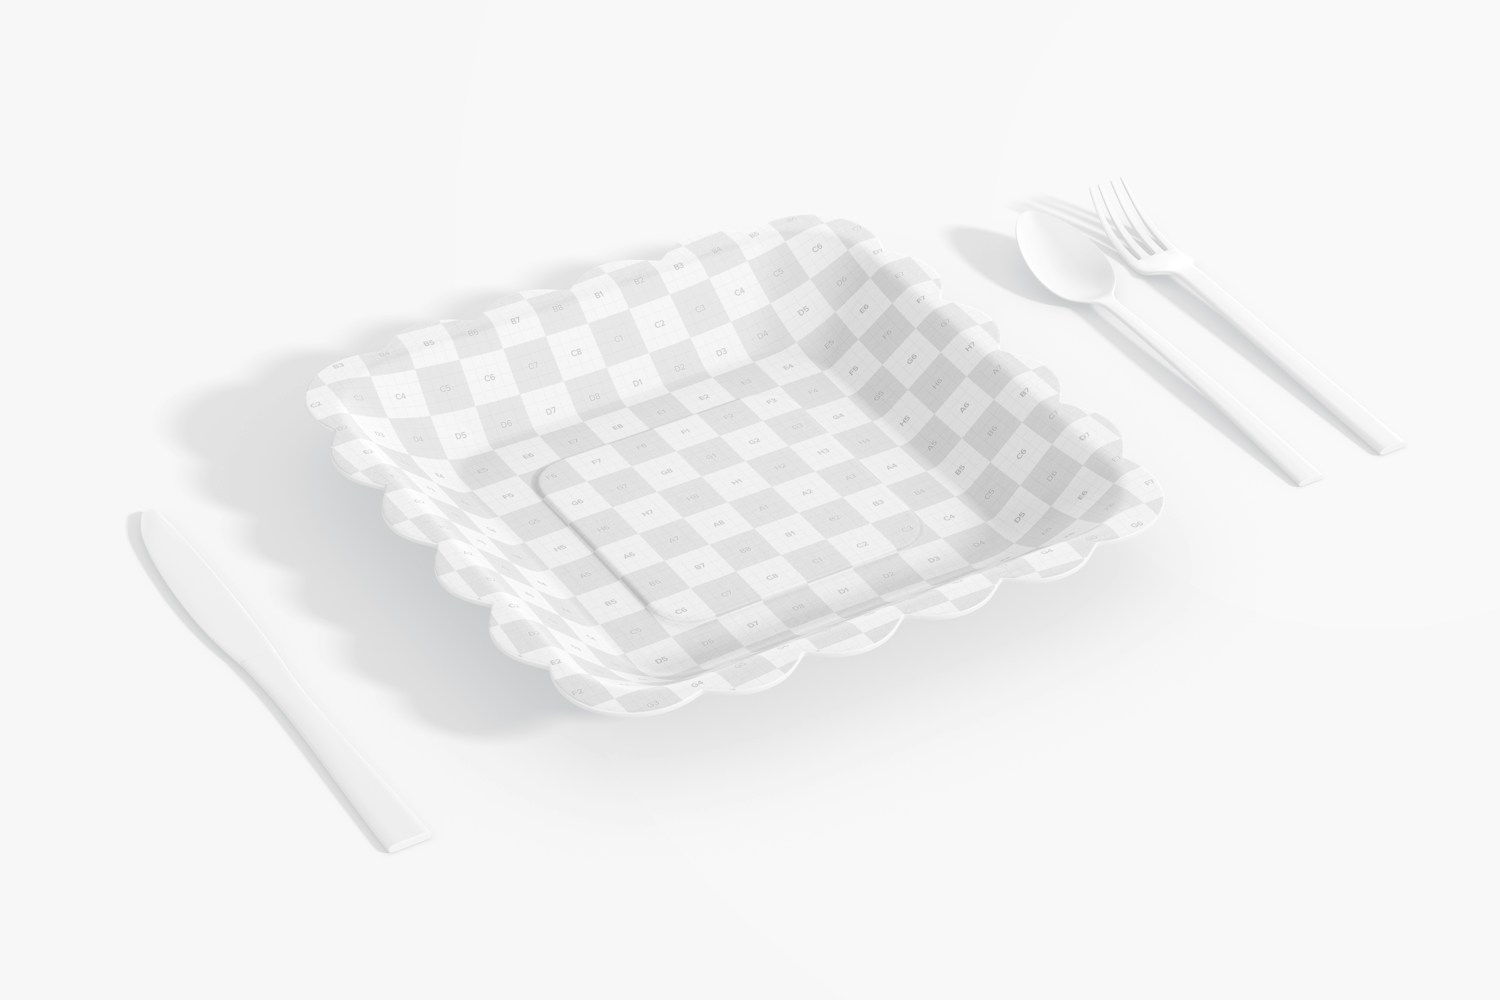 Square Paper Plate Mockup, Perspective